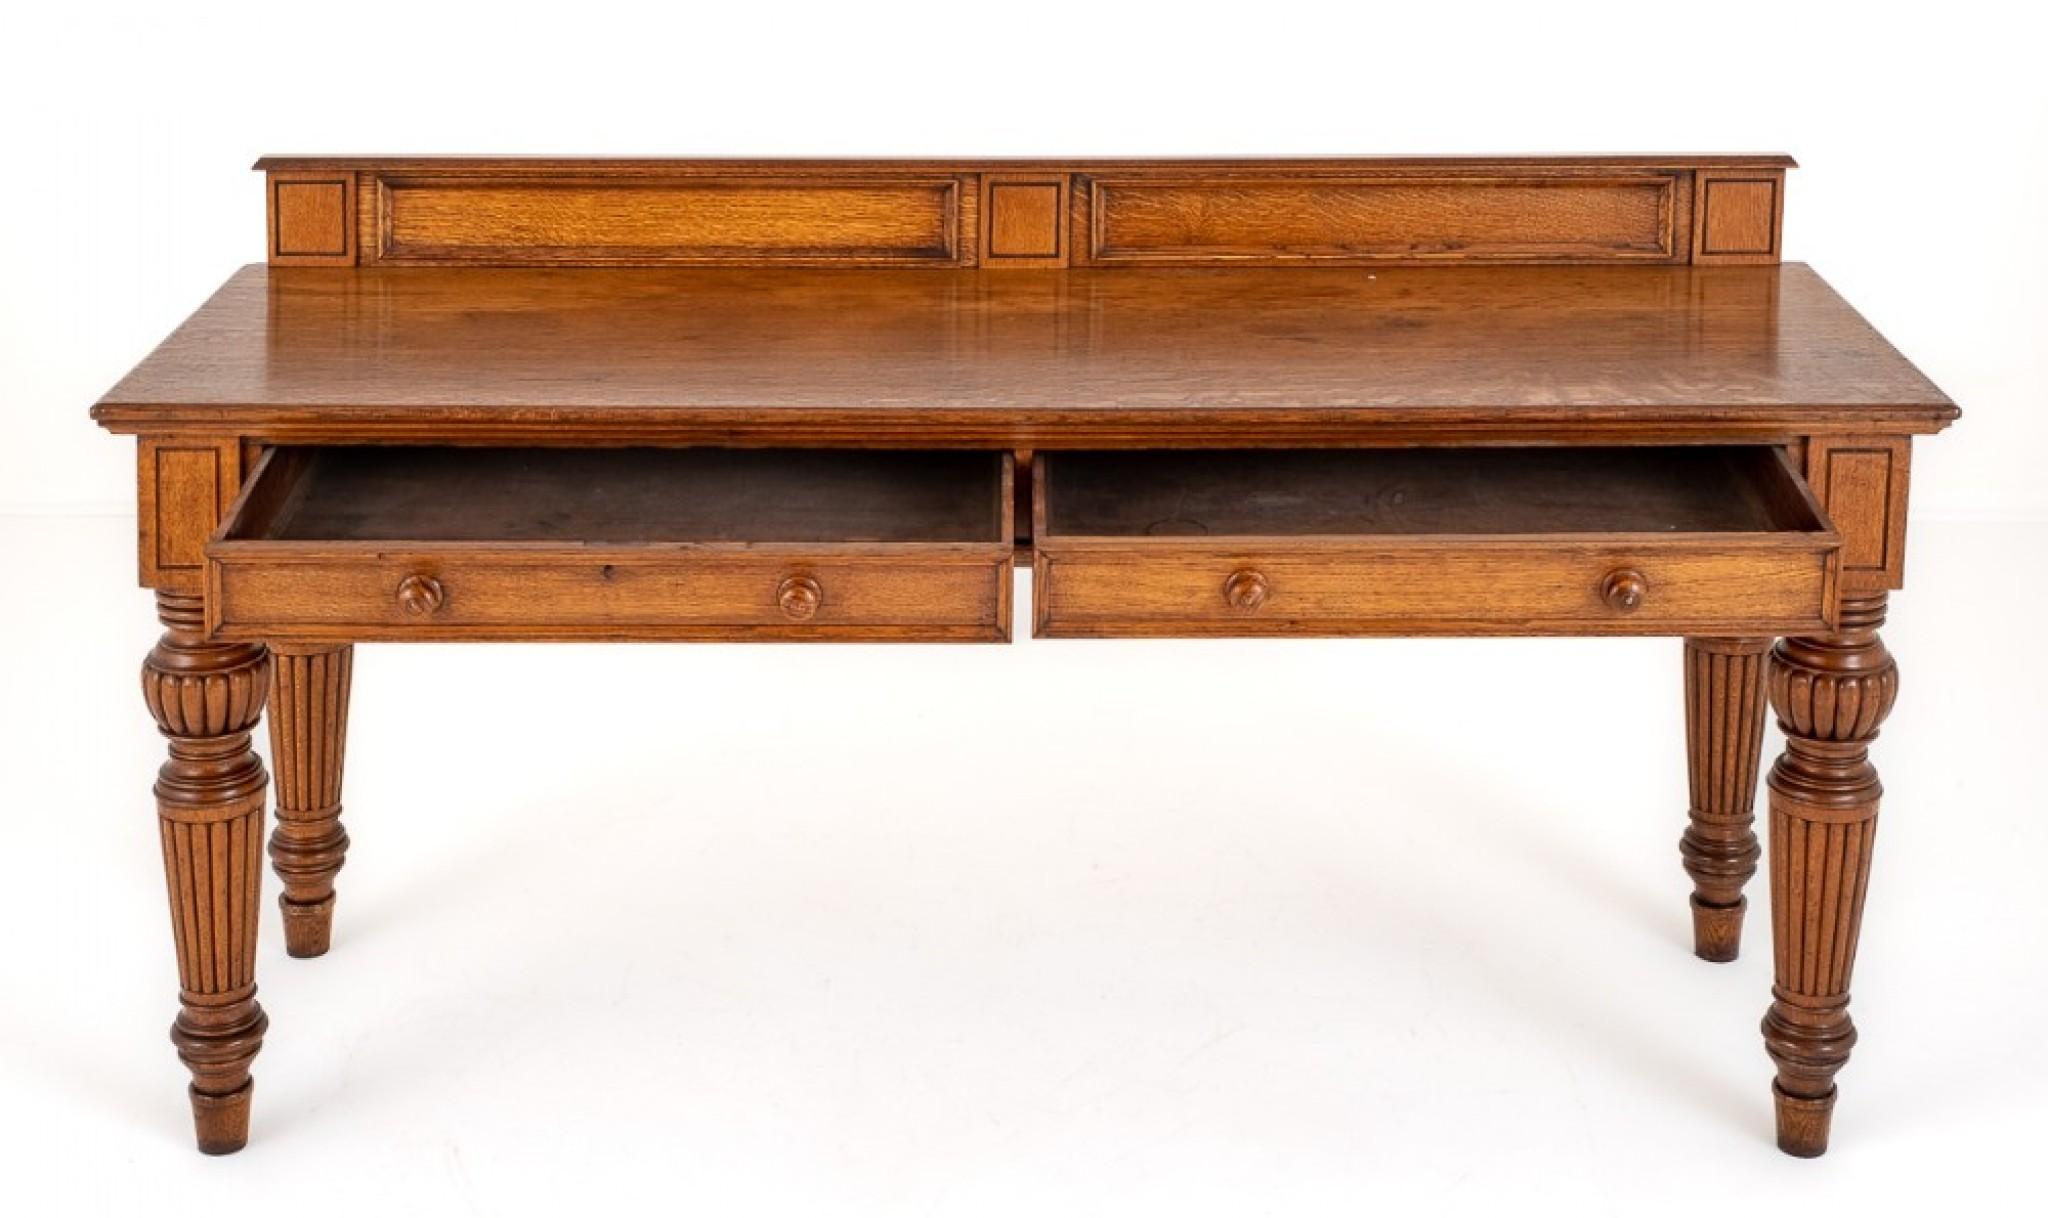 Victorian Serving Table Antique Oak Desk, 1860 In Good Condition For Sale In Potters Bar, GB